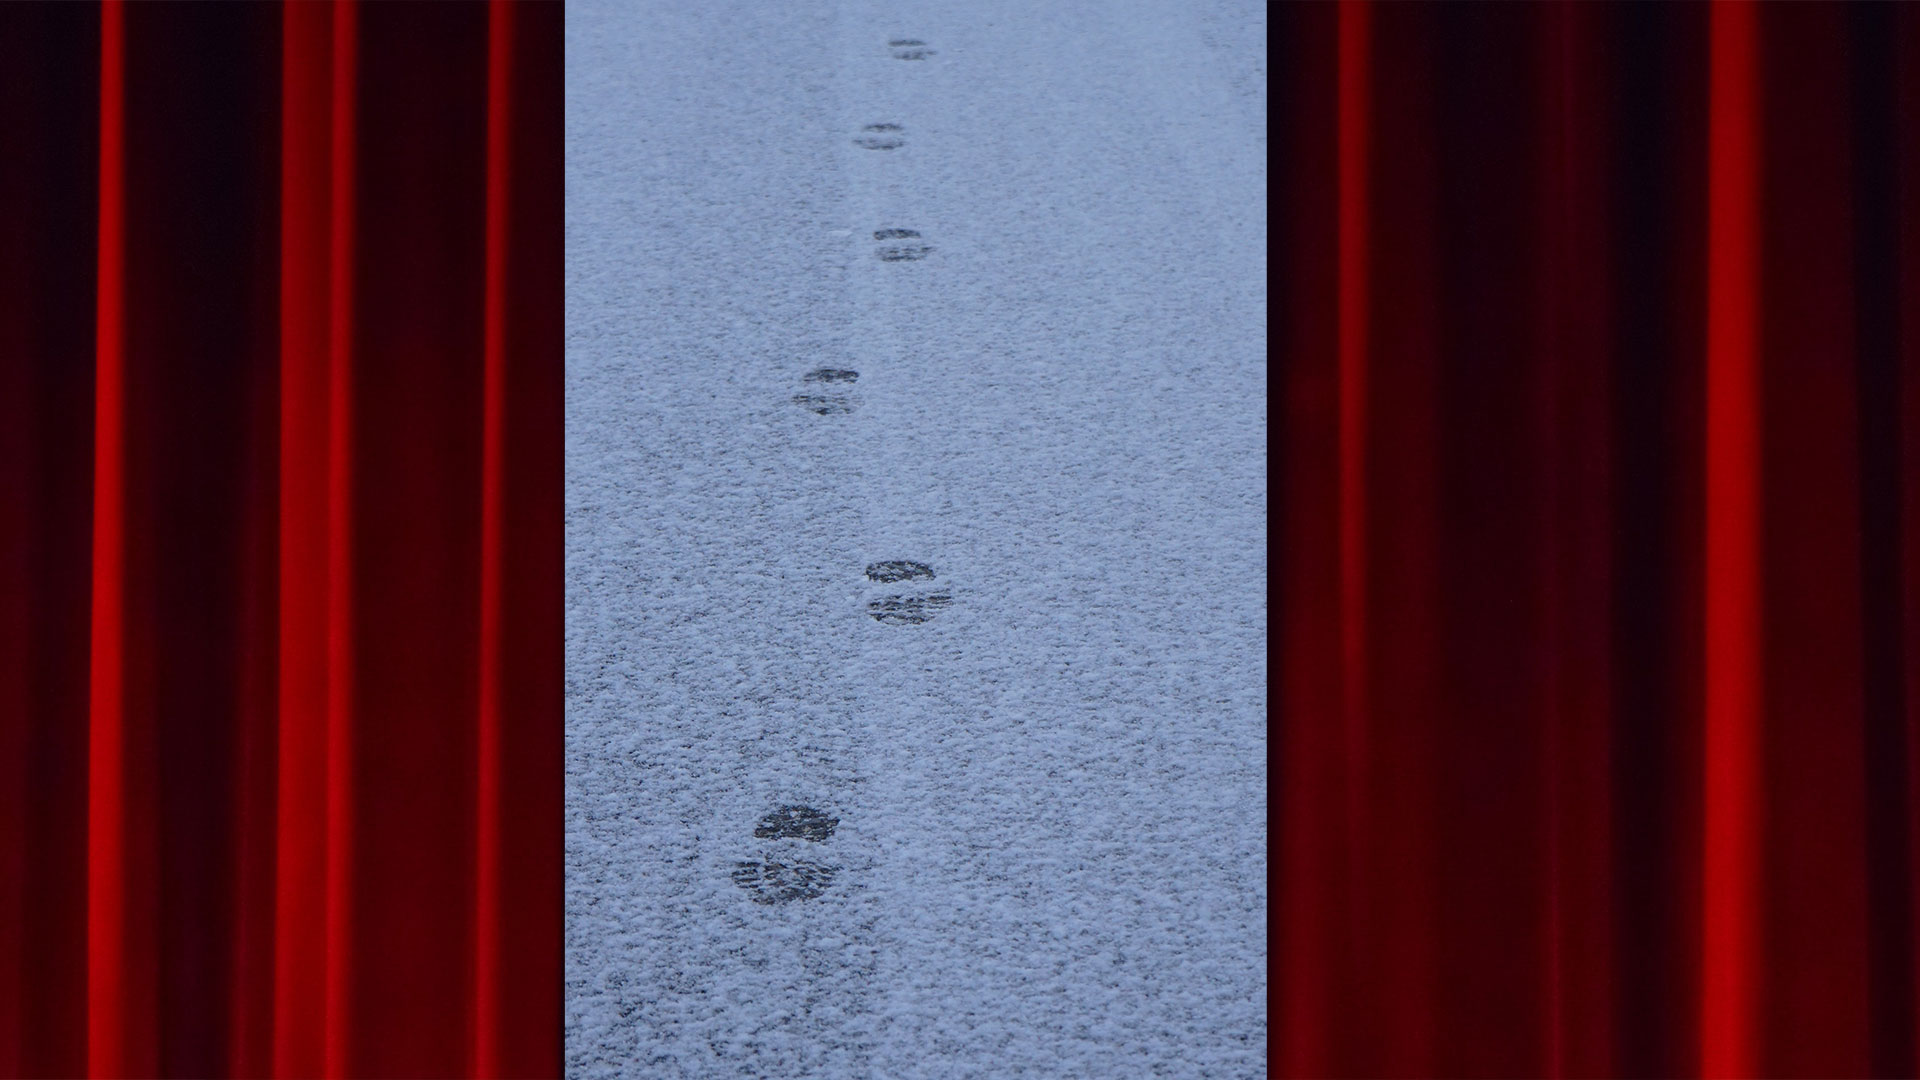 footprints on a snowy road appears between theatre curtains